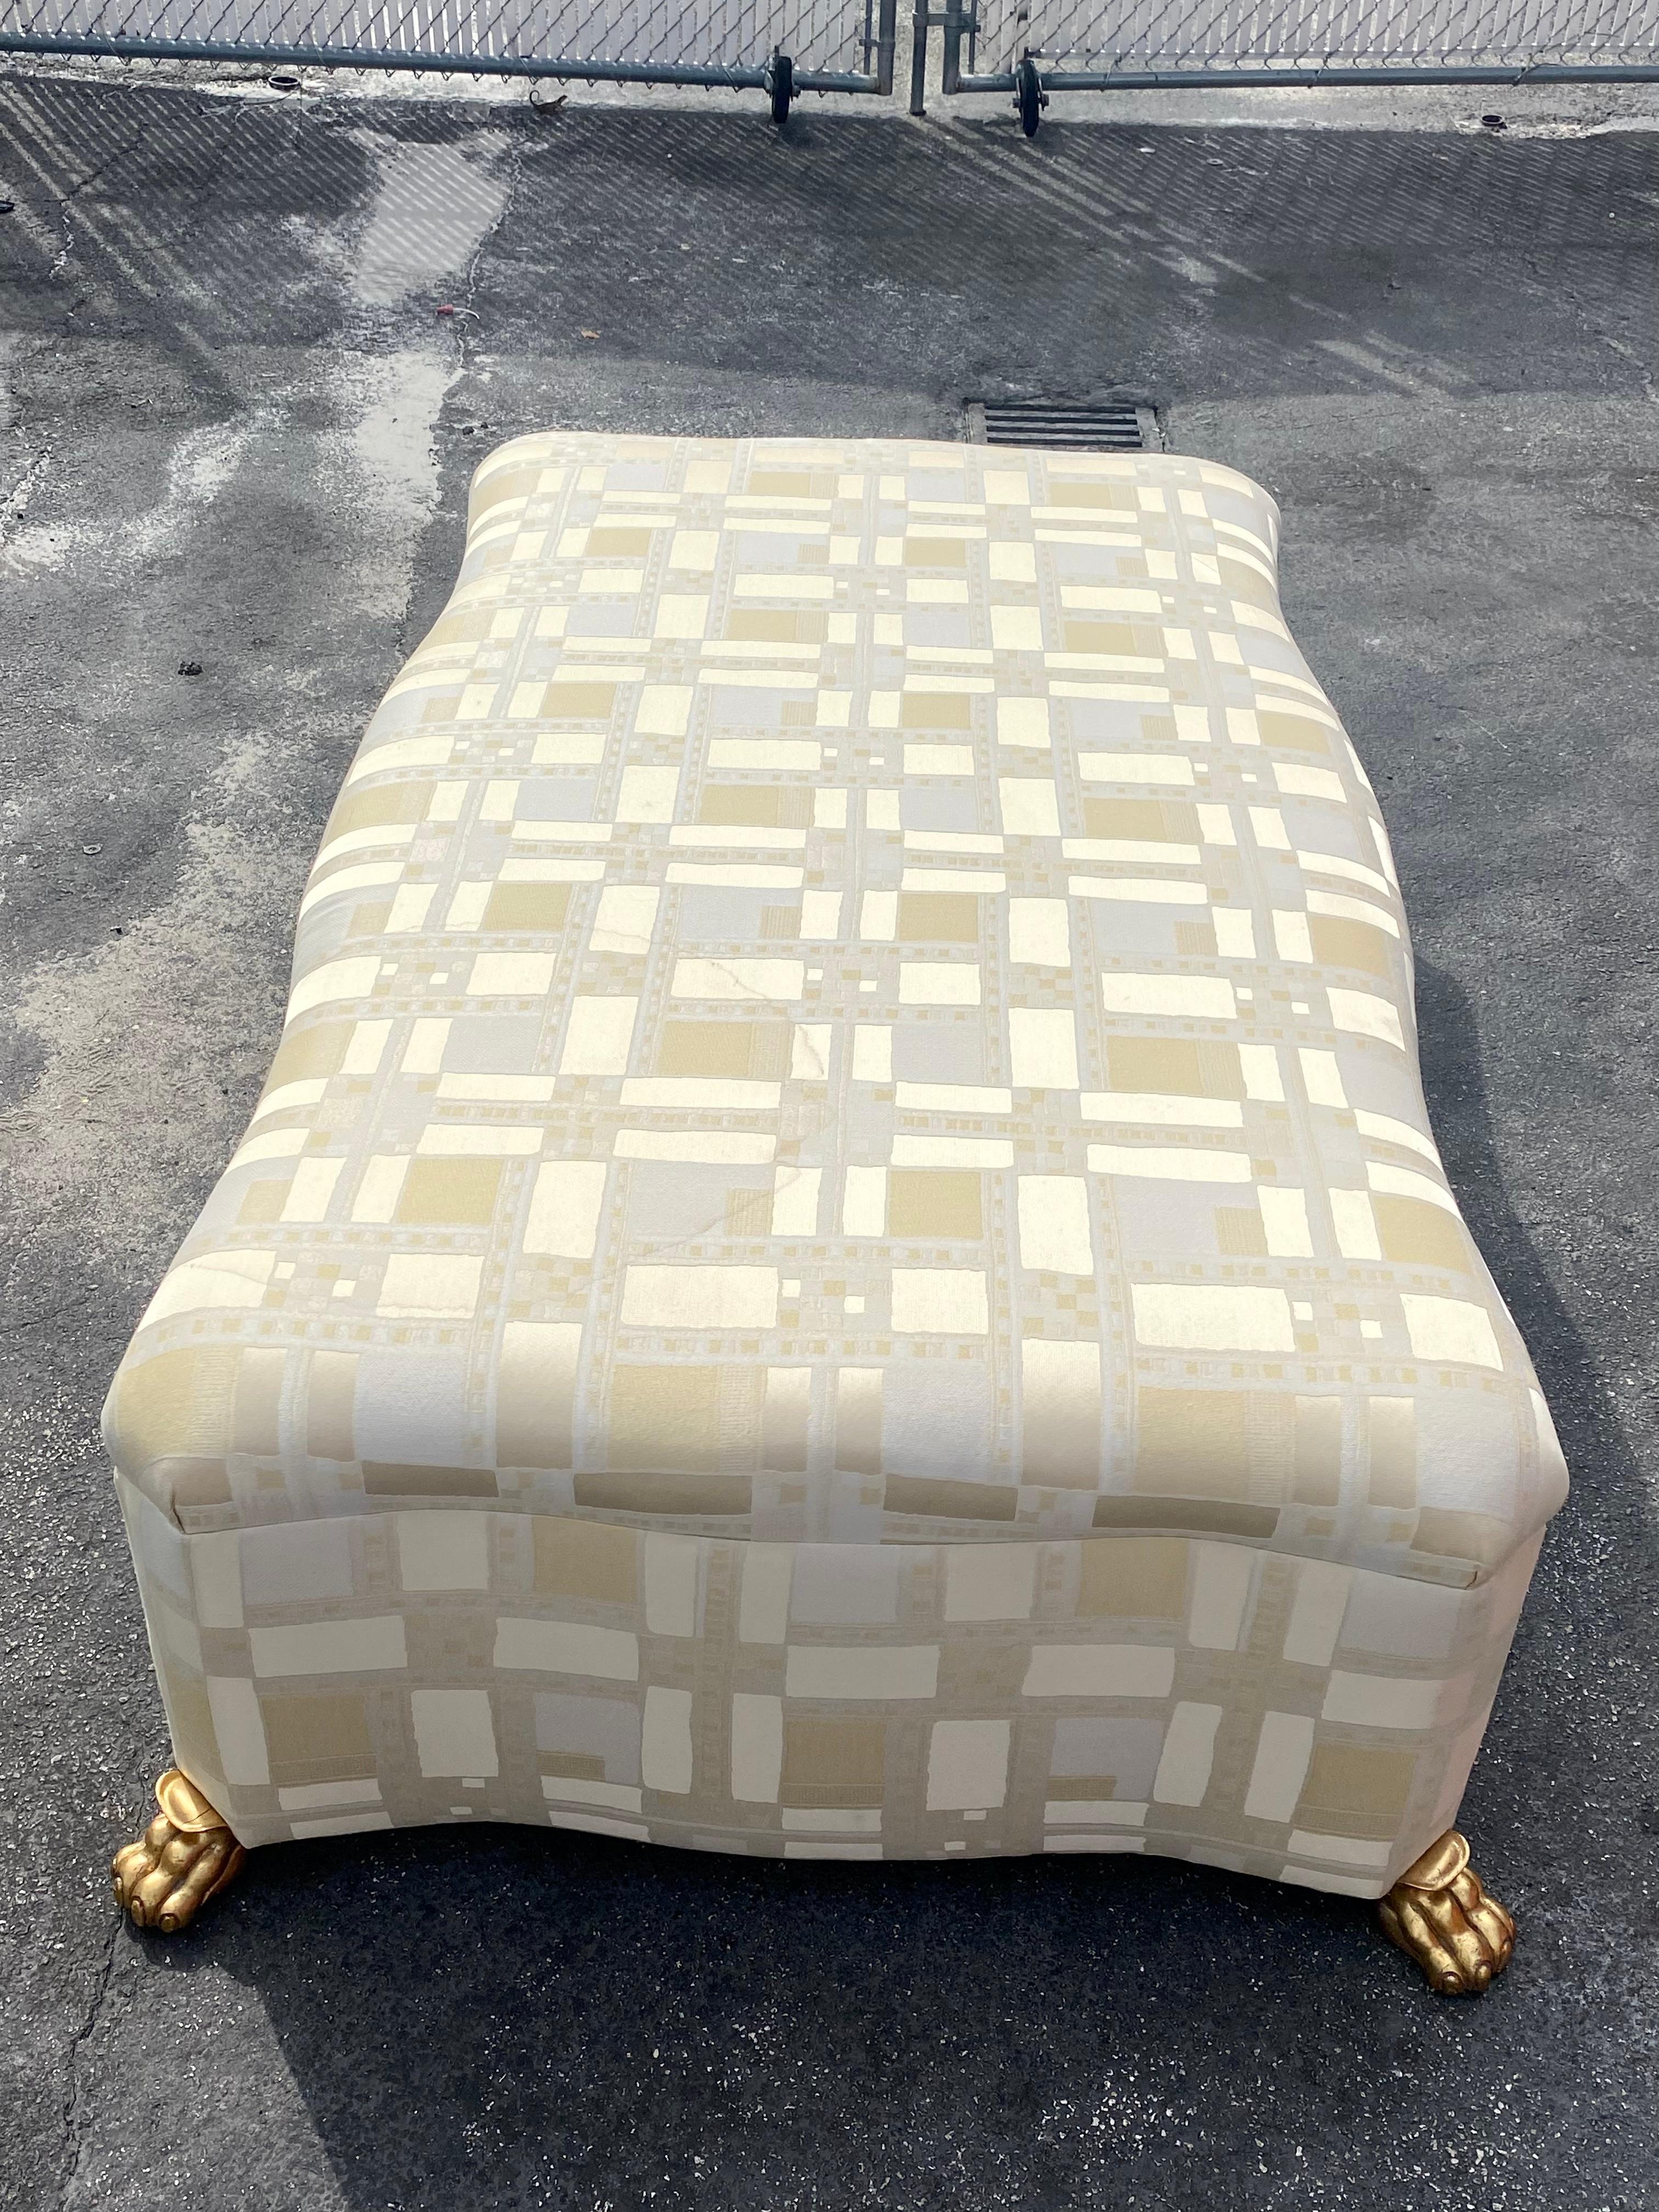 1980s Empire Style Sculptural Daybed Bench Ottoman In Good Condition For Sale In Fort Lauderdale, FL